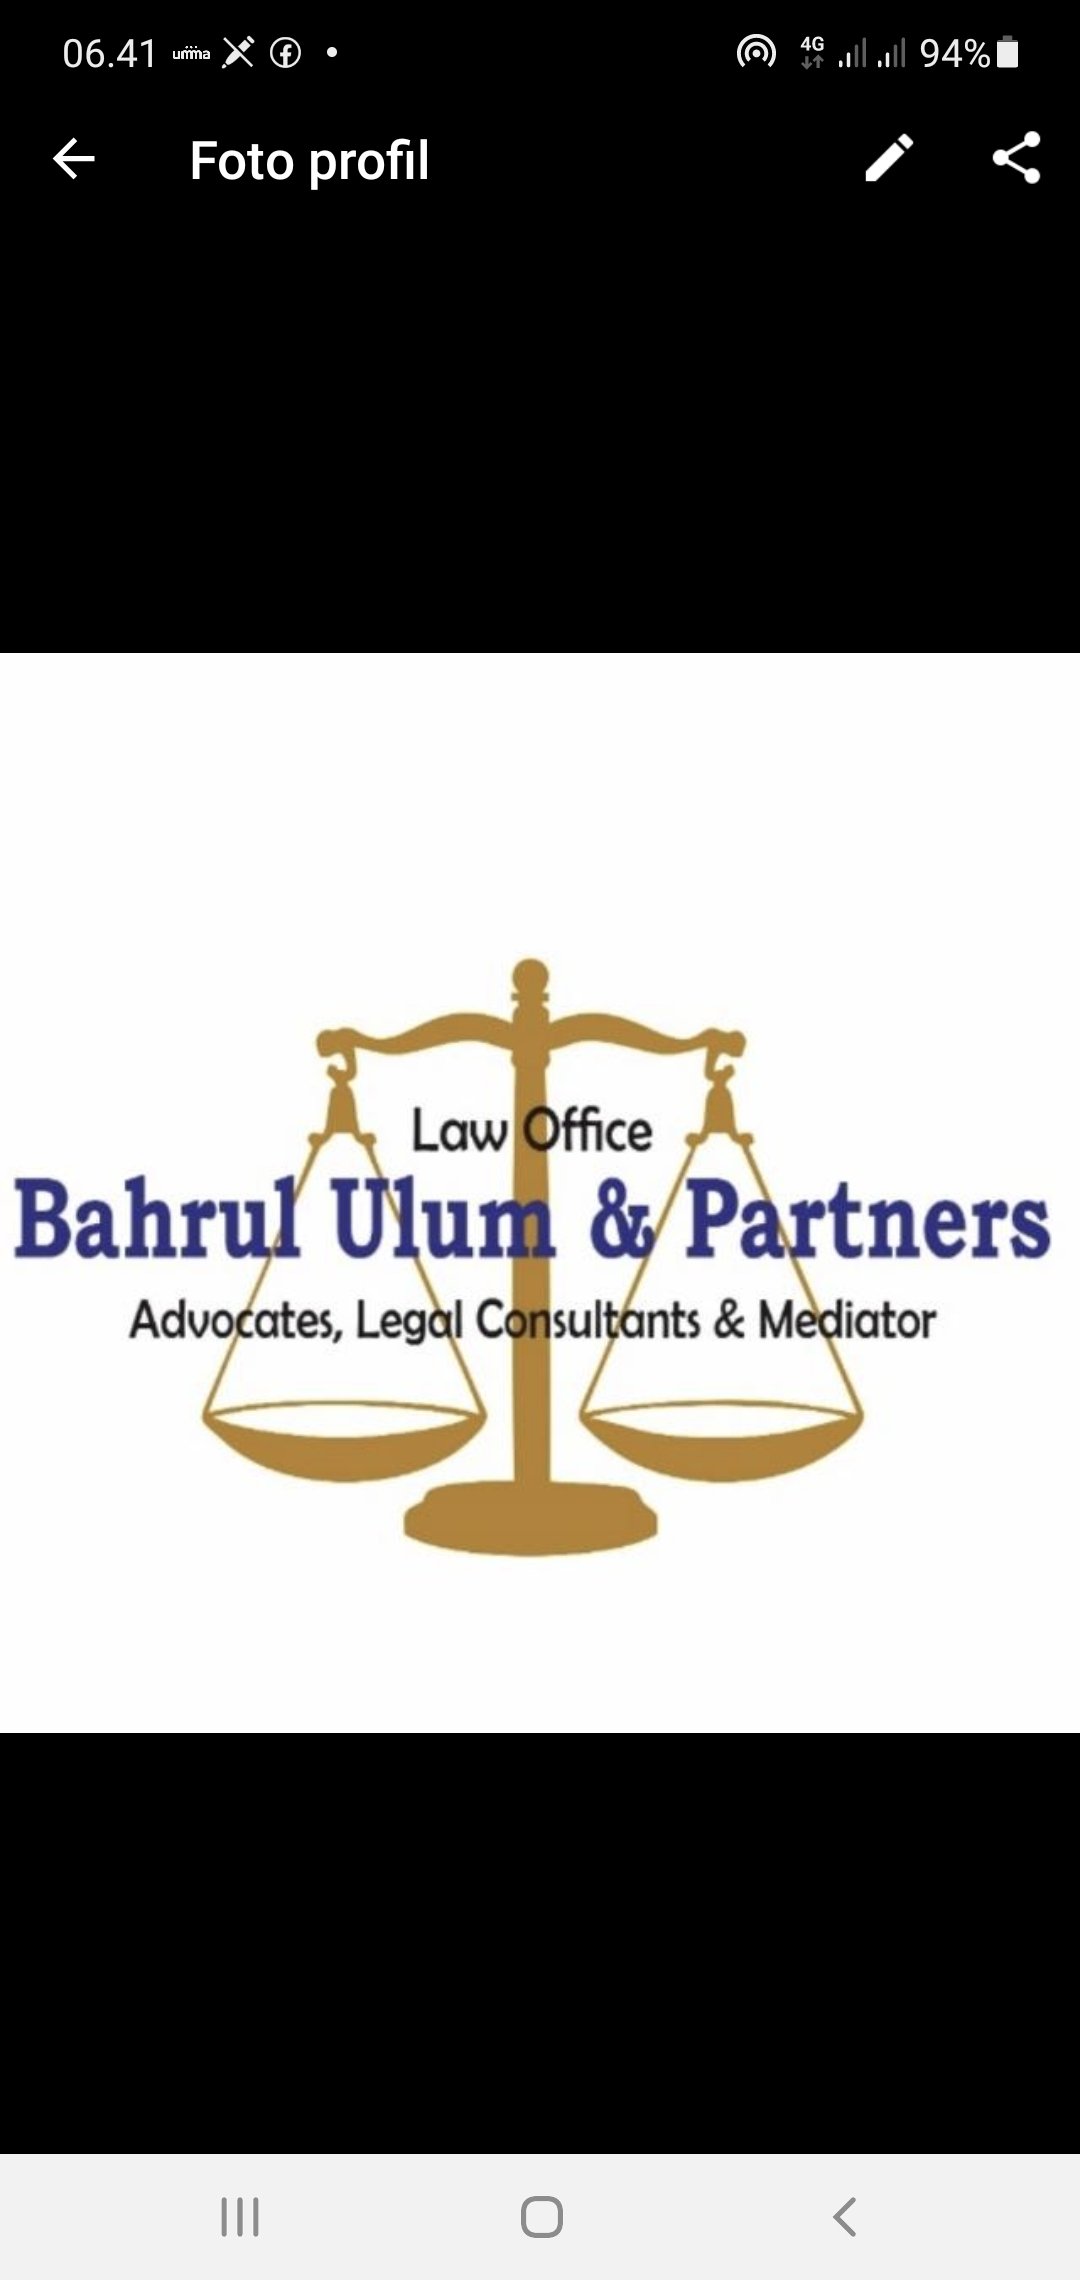 Law Office Bahrul Ulum & Partners cover photo